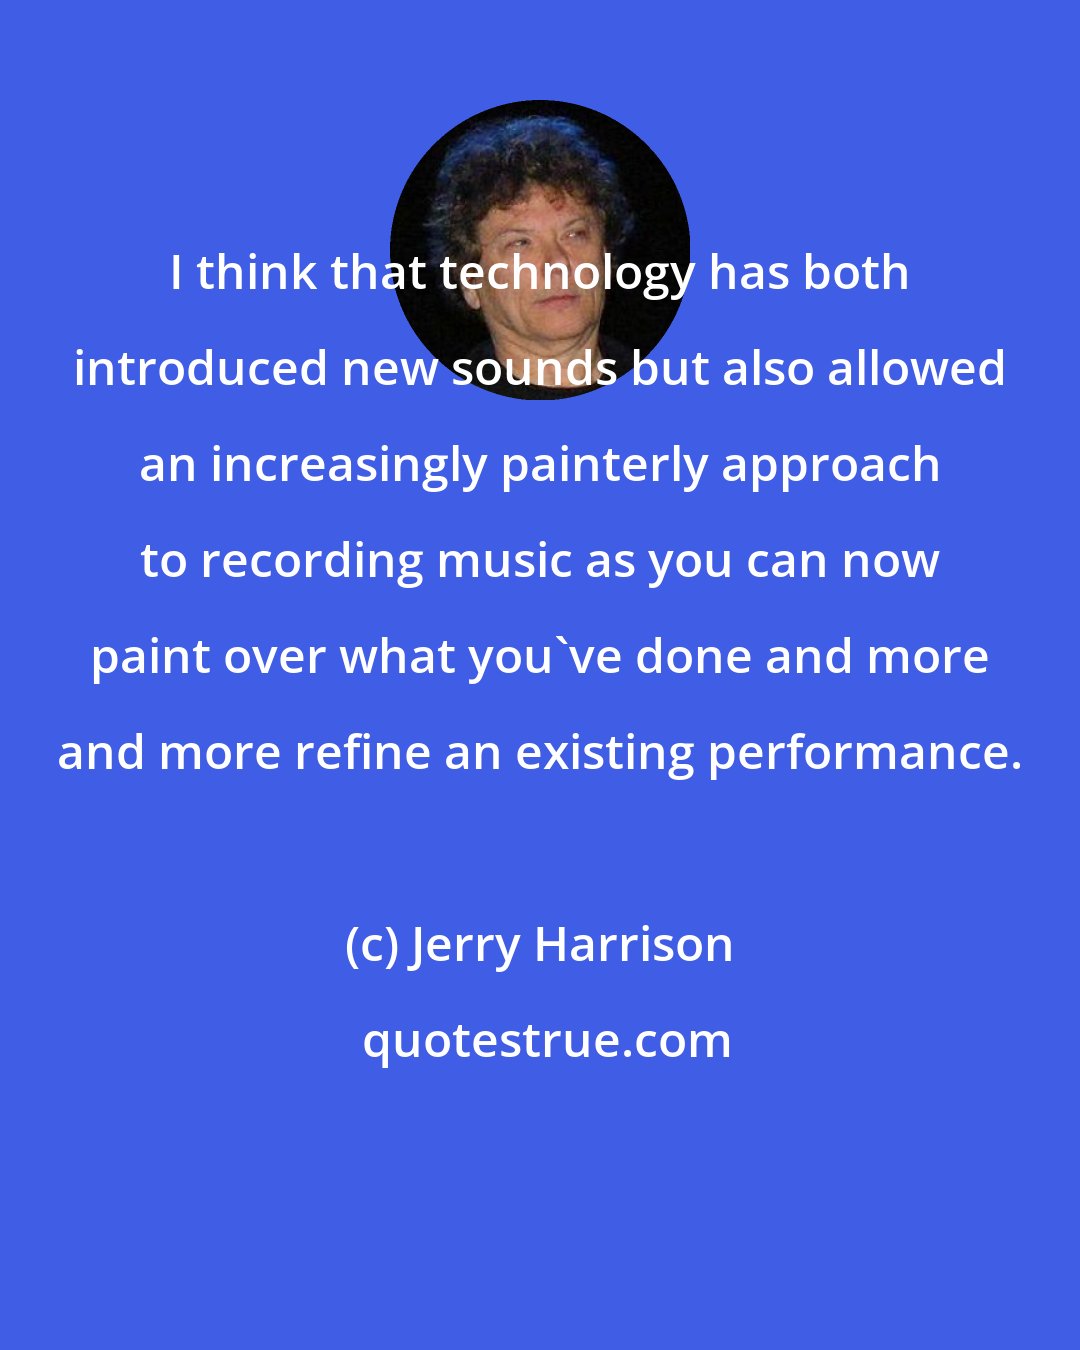 Jerry Harrison: I think that technology has both introduced new sounds but also allowed an increasingly painterly approach to recording music as you can now paint over what you've done and more and more refine an existing performance.